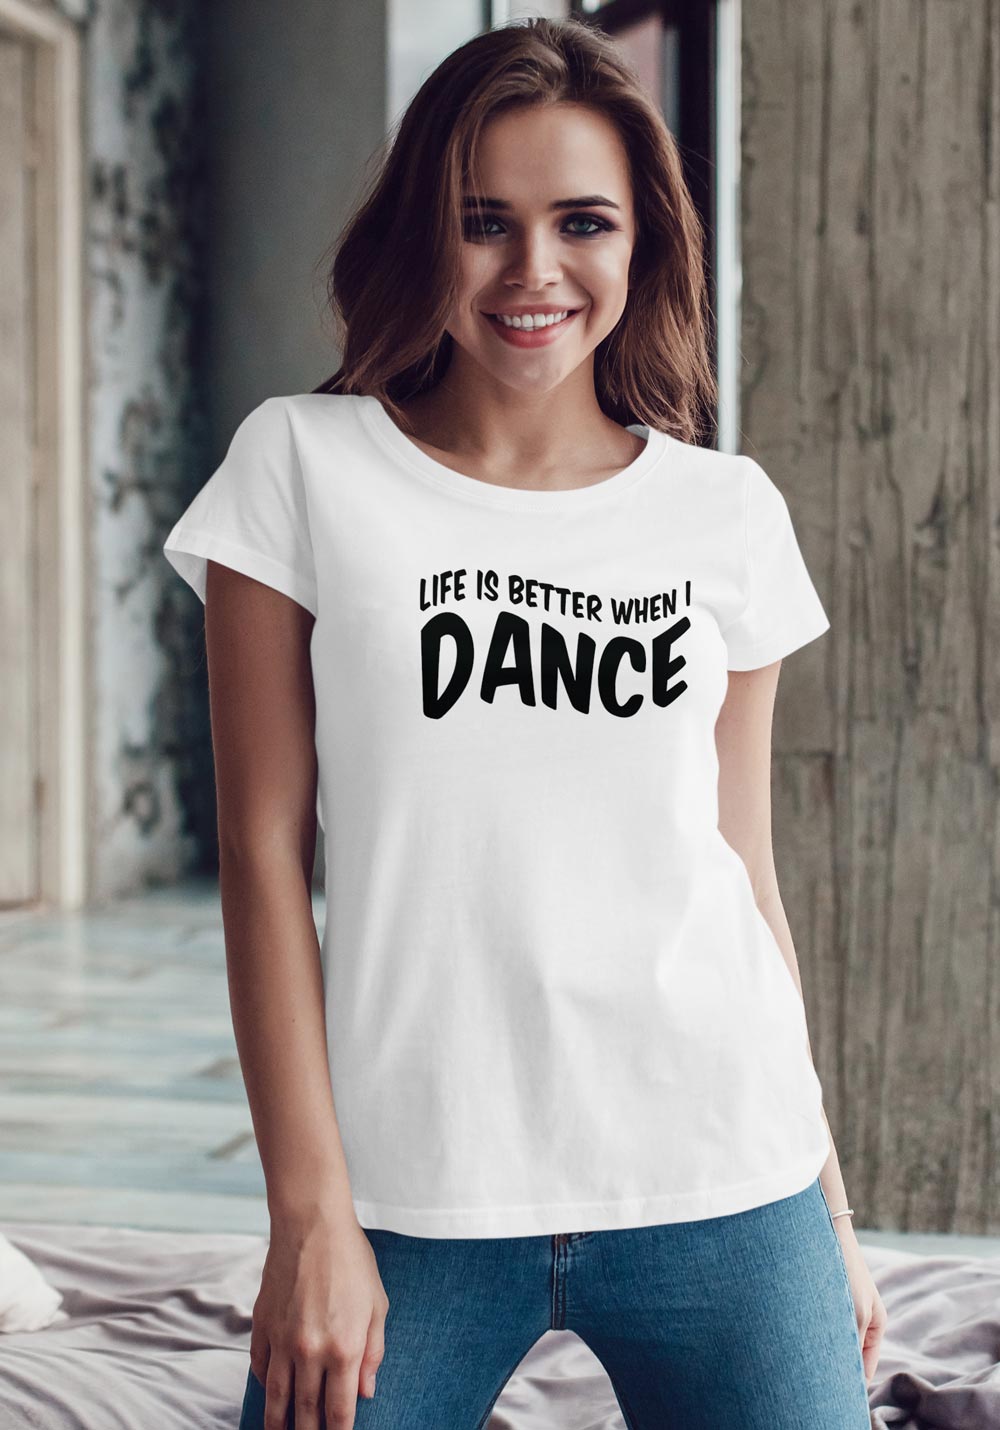 Woman wearing Zouk T-shirt decorated with unique "Life is better when I Dance" design in white crew neck style